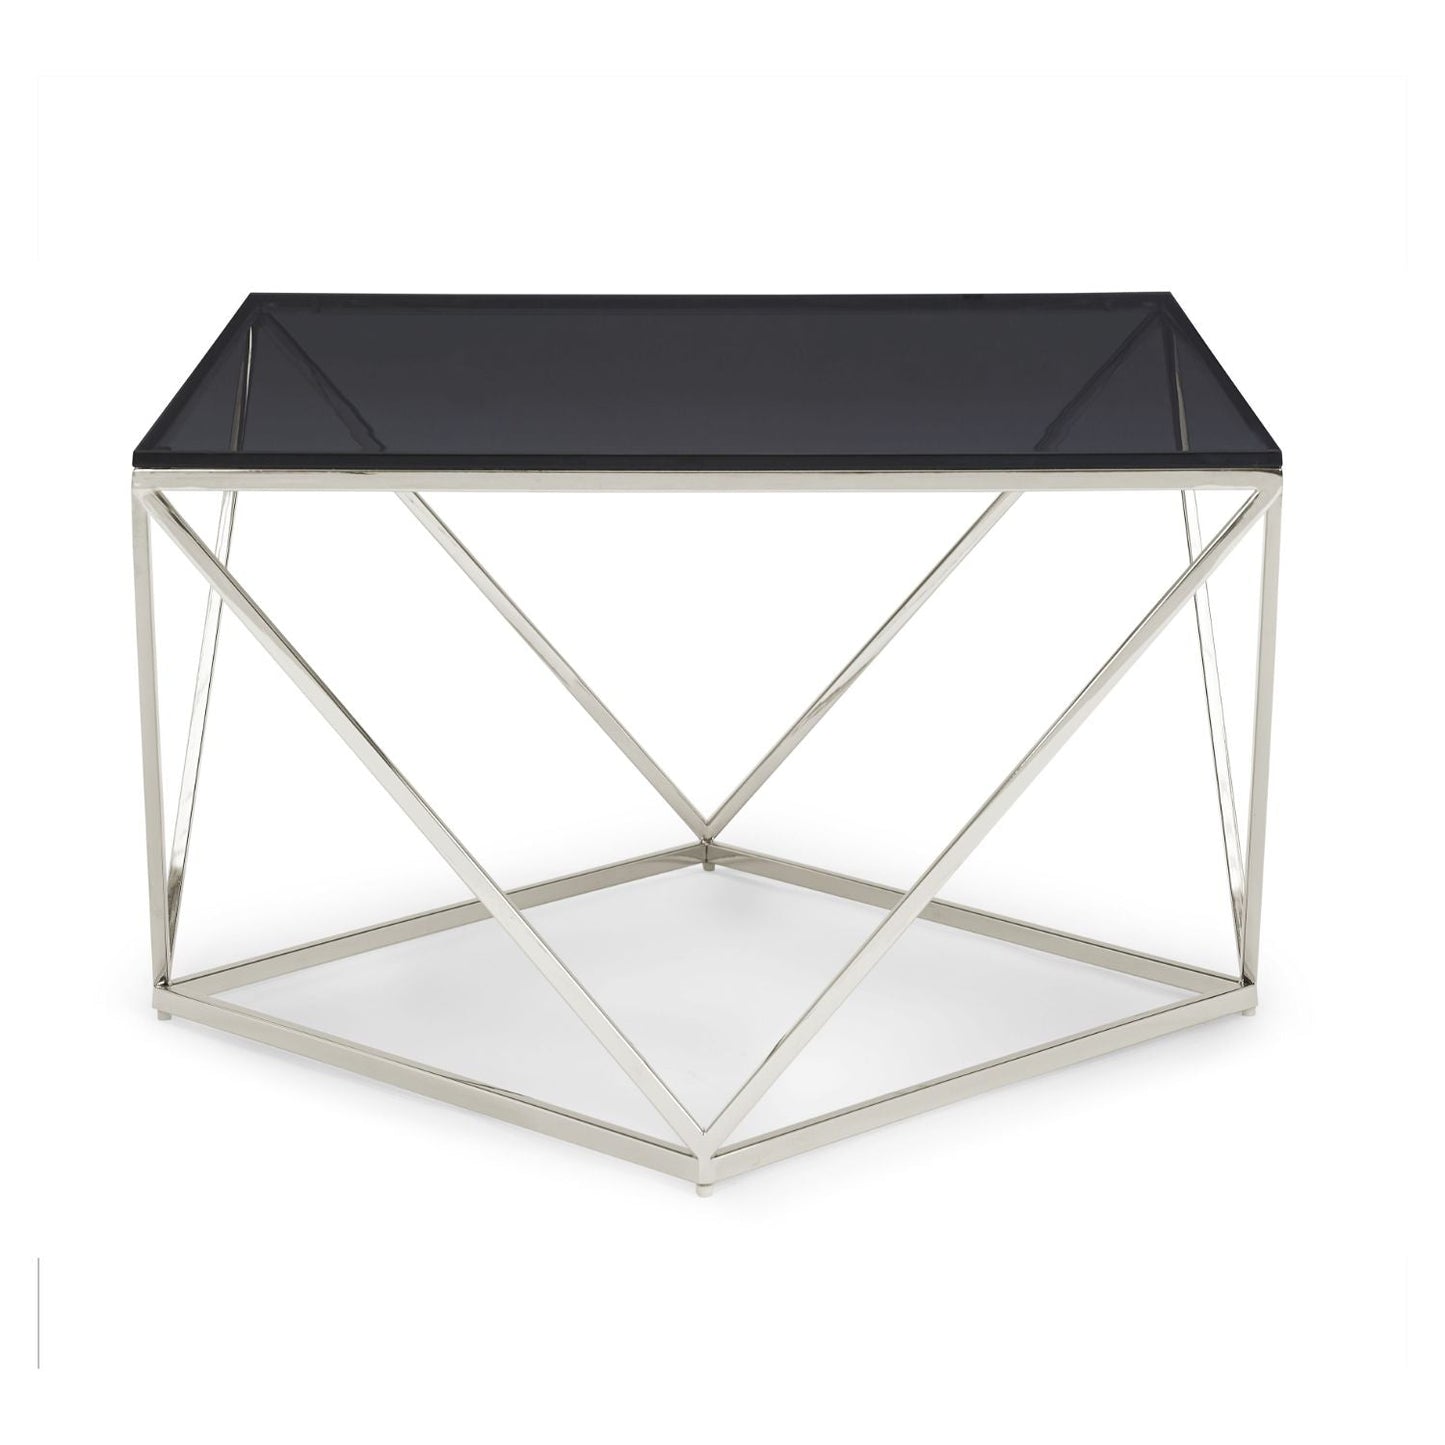 Modus Aria Smoked Glass and Polished Stainless Steel Coffee Table in Multi